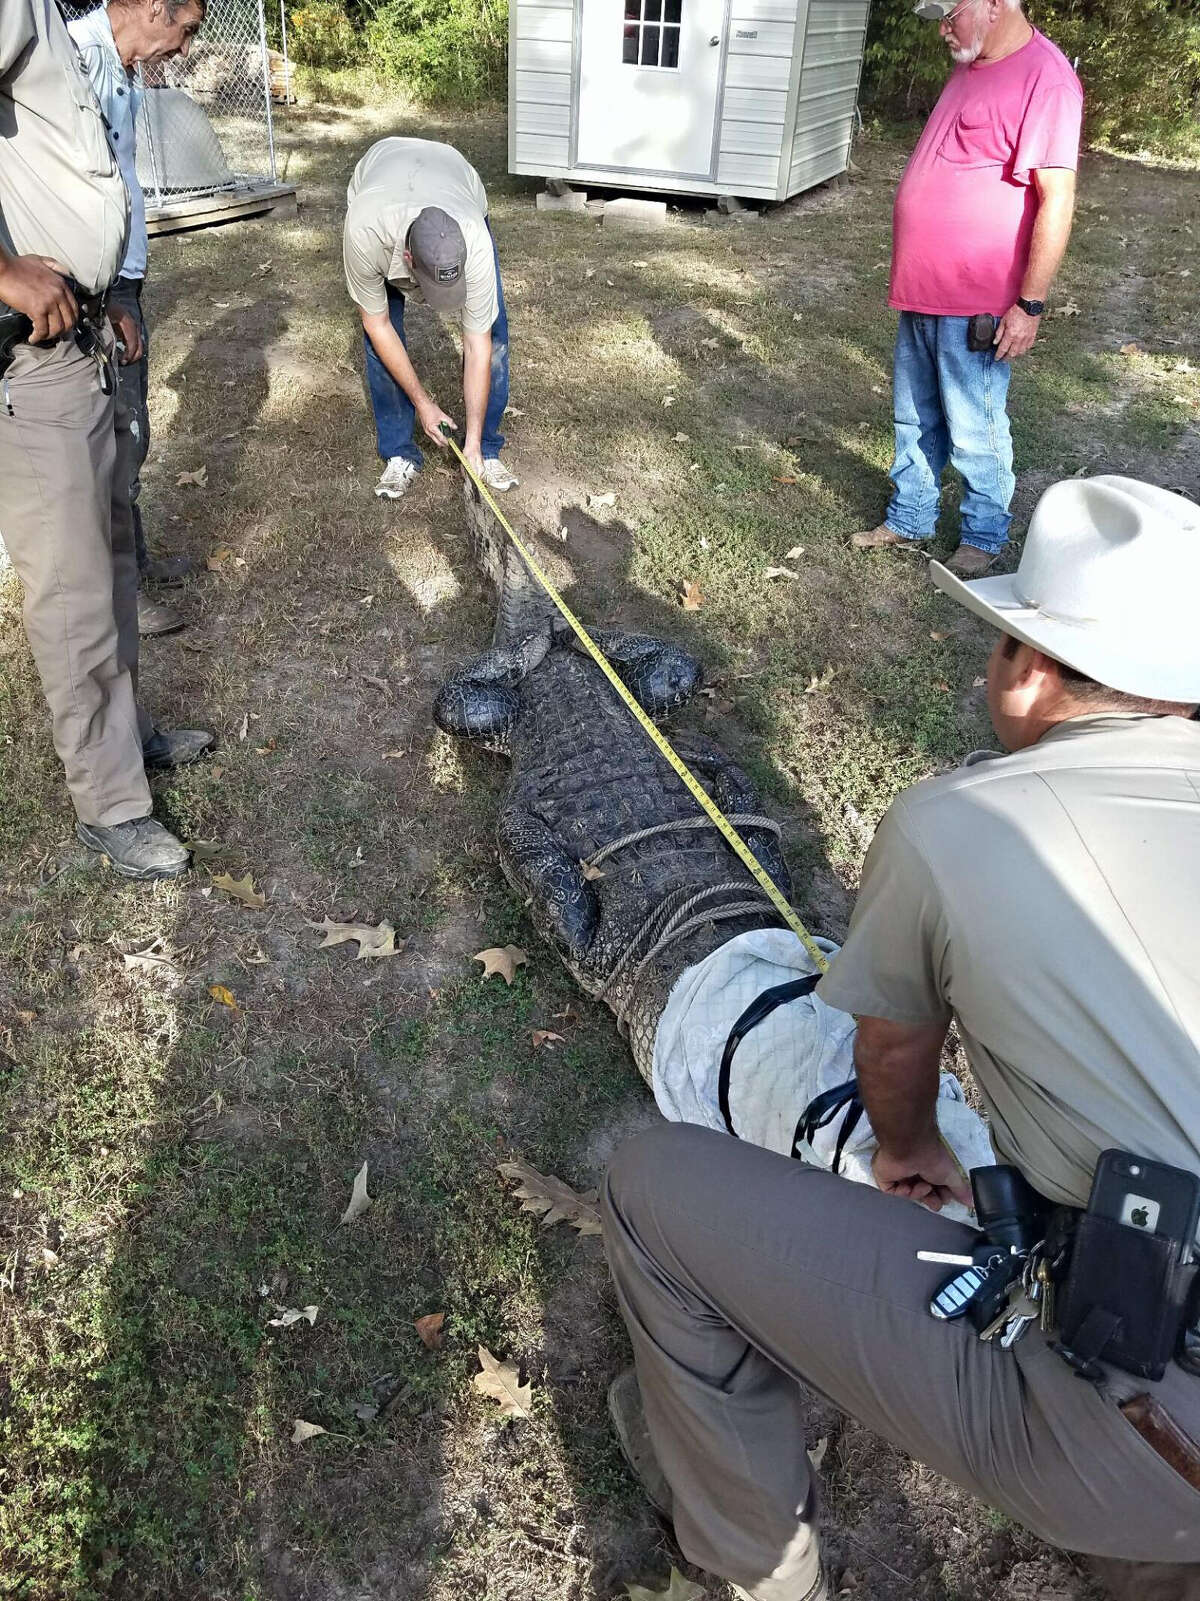 A tape measure is used to determine the length of an alligator found under a travel trailer in the Holiday Villages subdivision on Thursday, Oct. 13. It measured in at 11 feet.